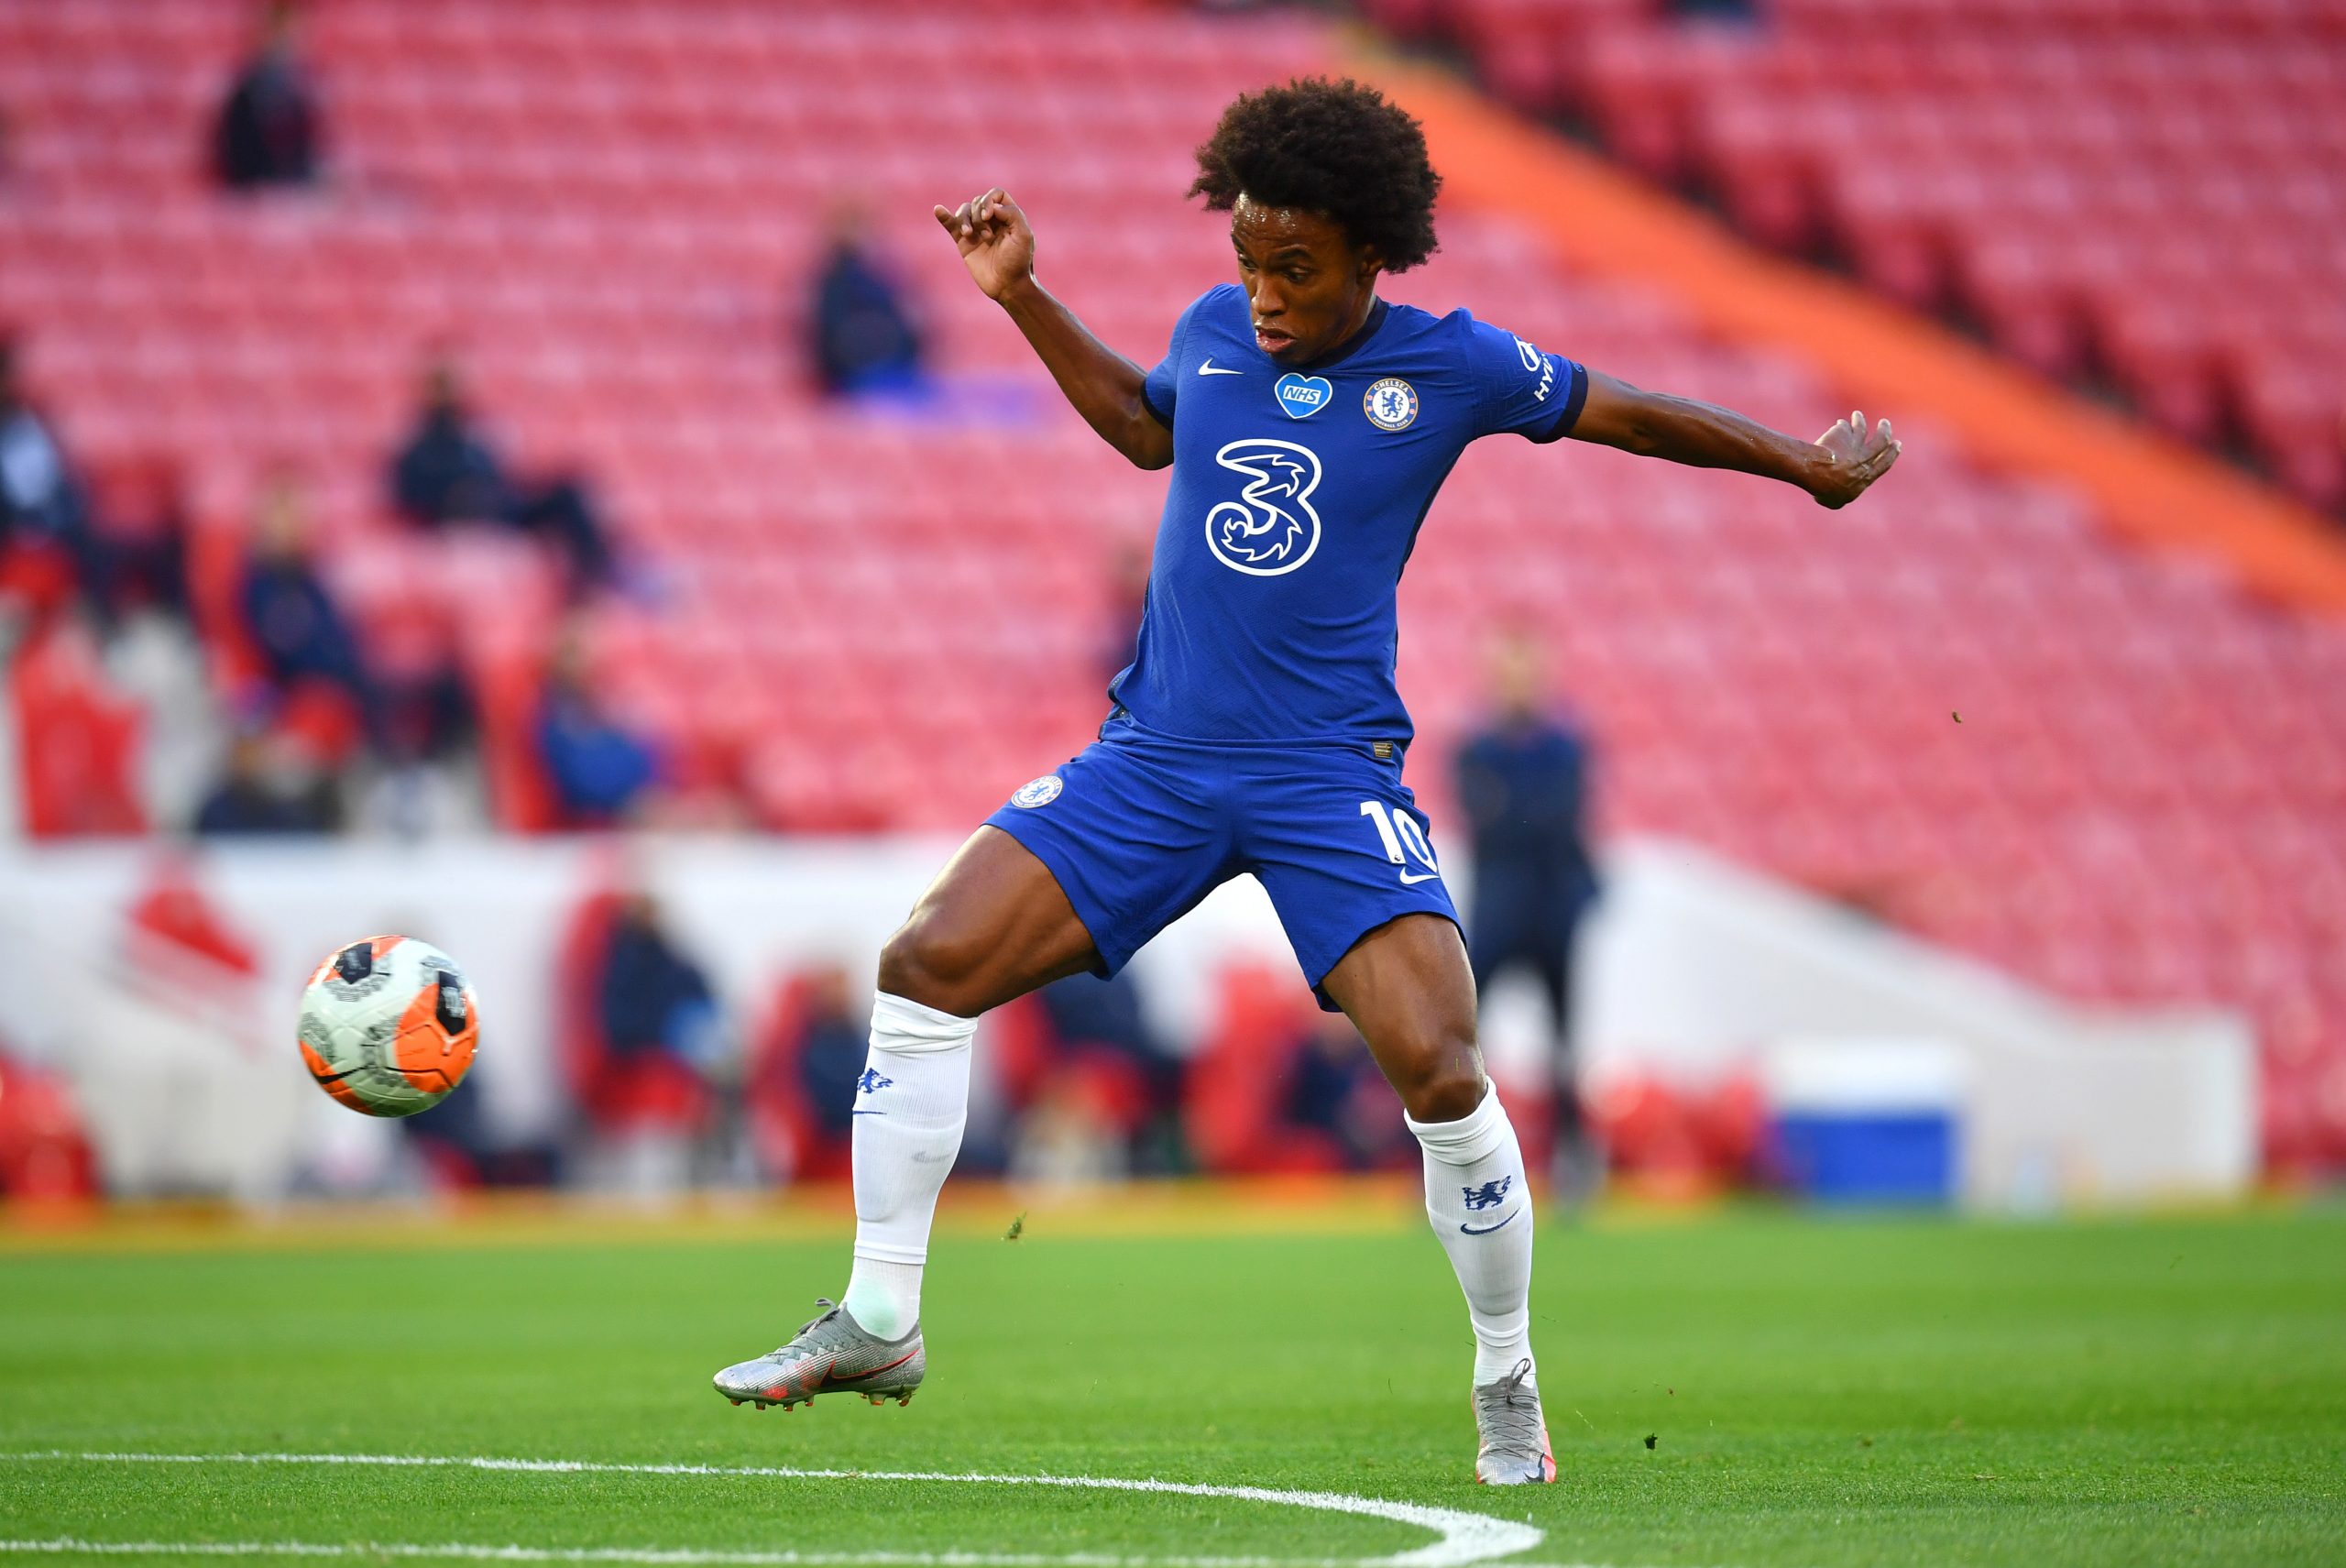 Arsenal offer three-year contract to Chelsea playmaker Willian who is seen in the picture